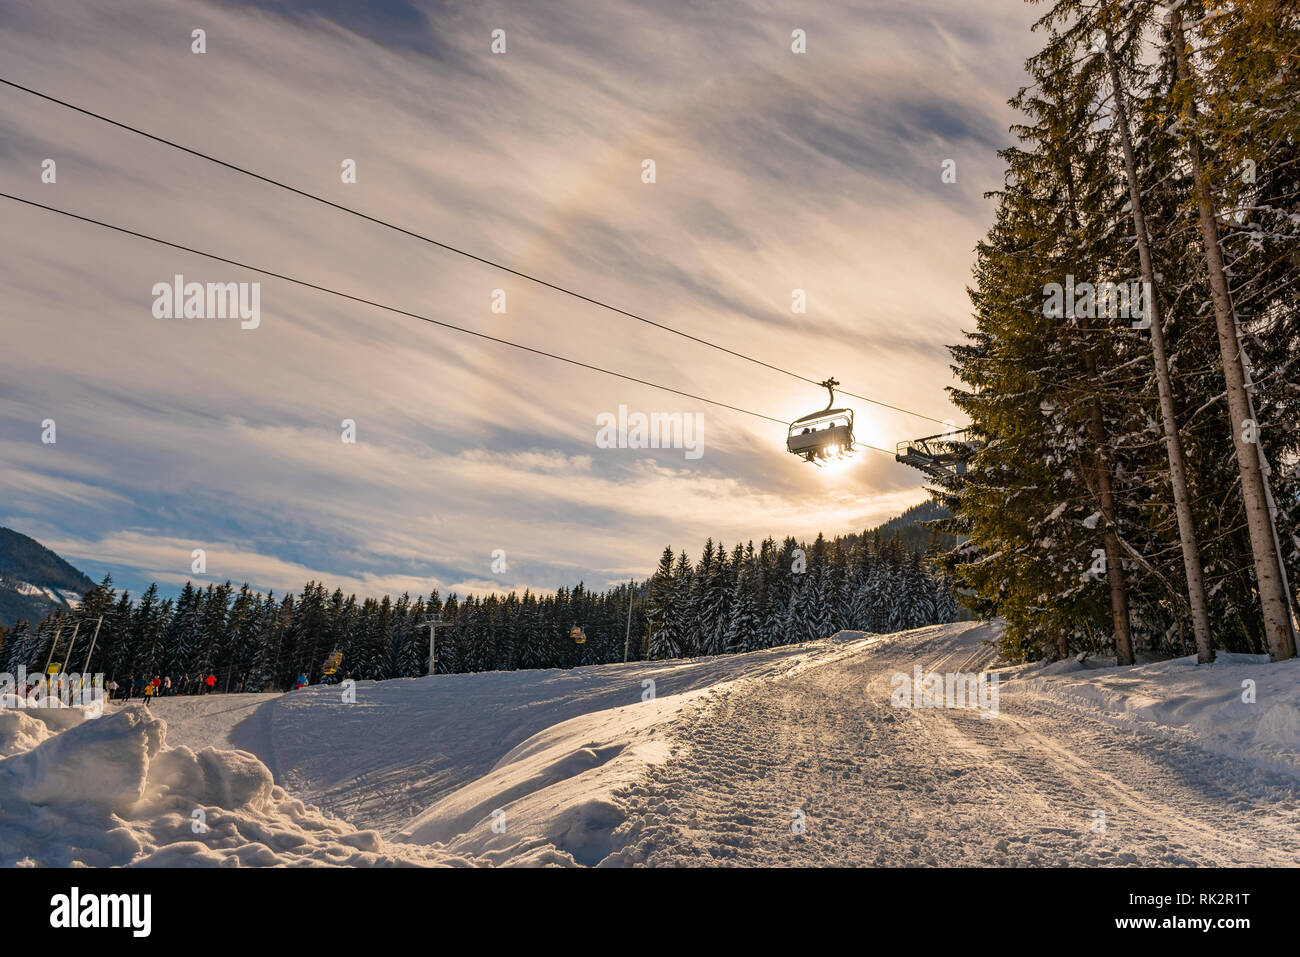 Four skiers on a chair lift against the backdrop of the sun and trees, contour photo, orange shades and halo atmospheric optical phenomenon effect. Stock Photo